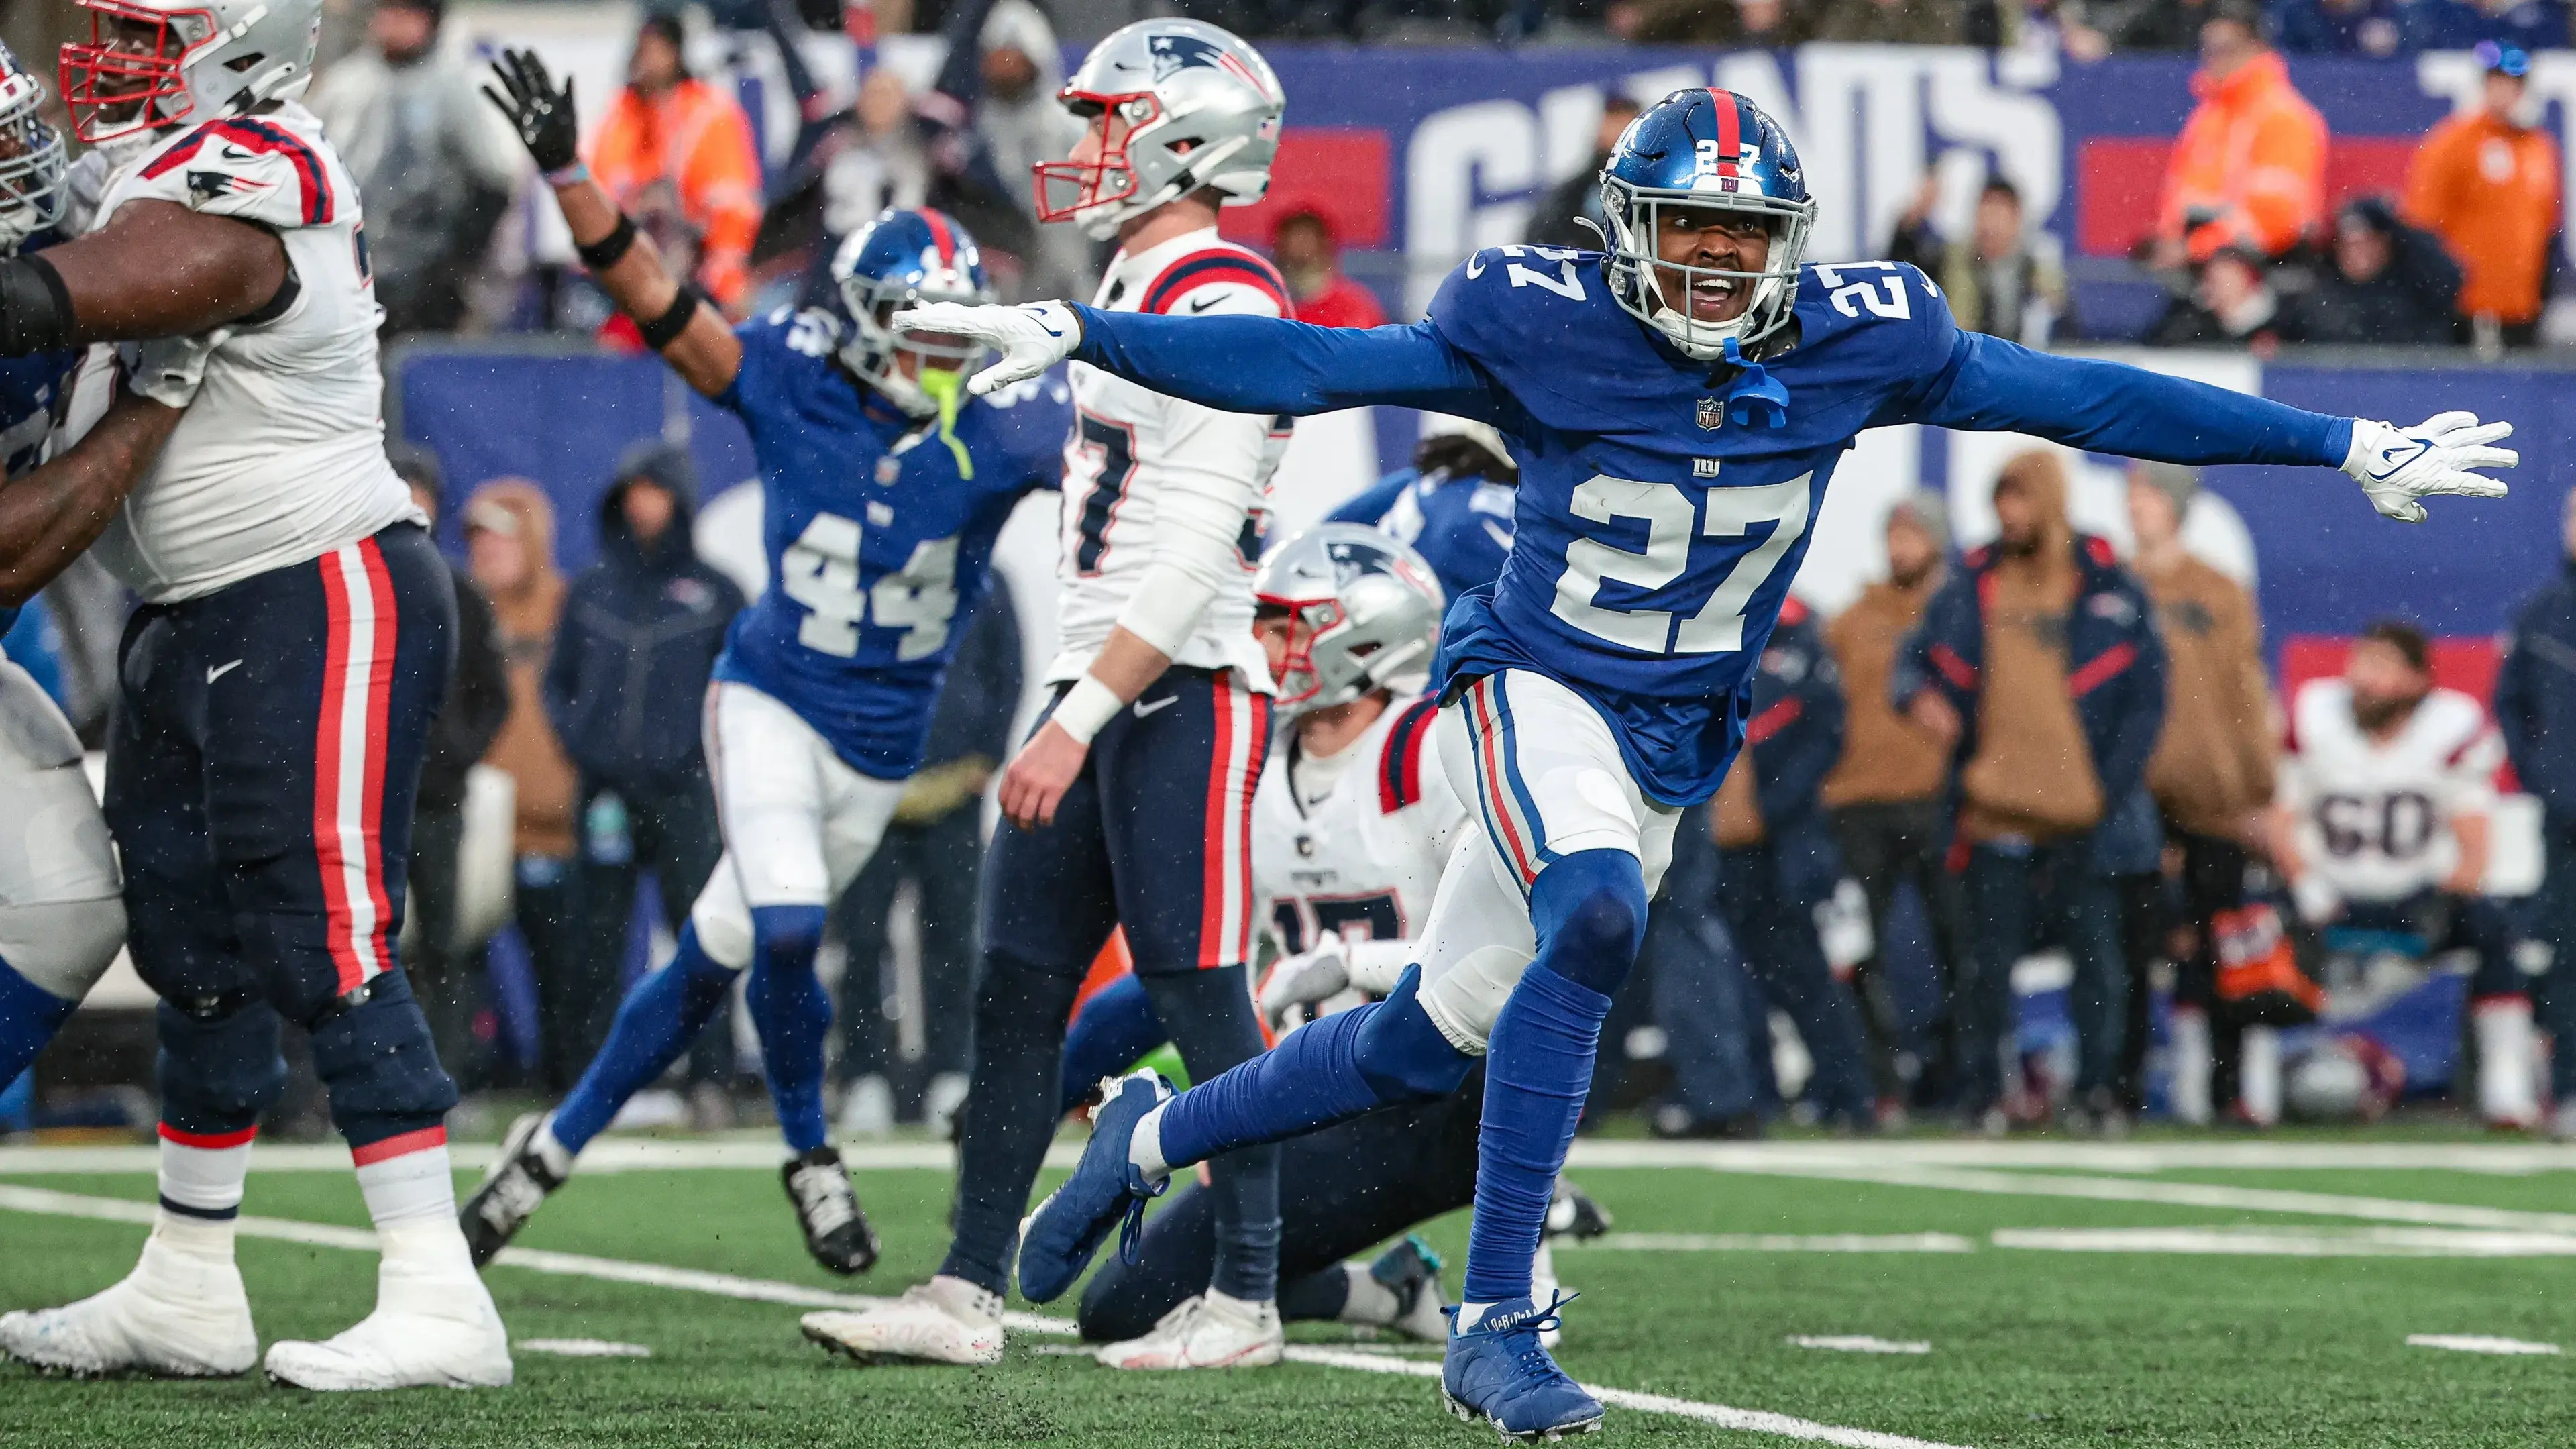 Nov 26, 2023; East Rutherford, New Jersey, USA; New York Giants safety Jason Pinnock (27) celebrates after New England Patriots place kicker Chad Ryland (37) misses a field goal during the fourth quarter at MetLife Stadium. Mandatory Credit: Vincent Carchietta-USA TODAY Sports / © Vincent Carchietta-USA TODAY Sports